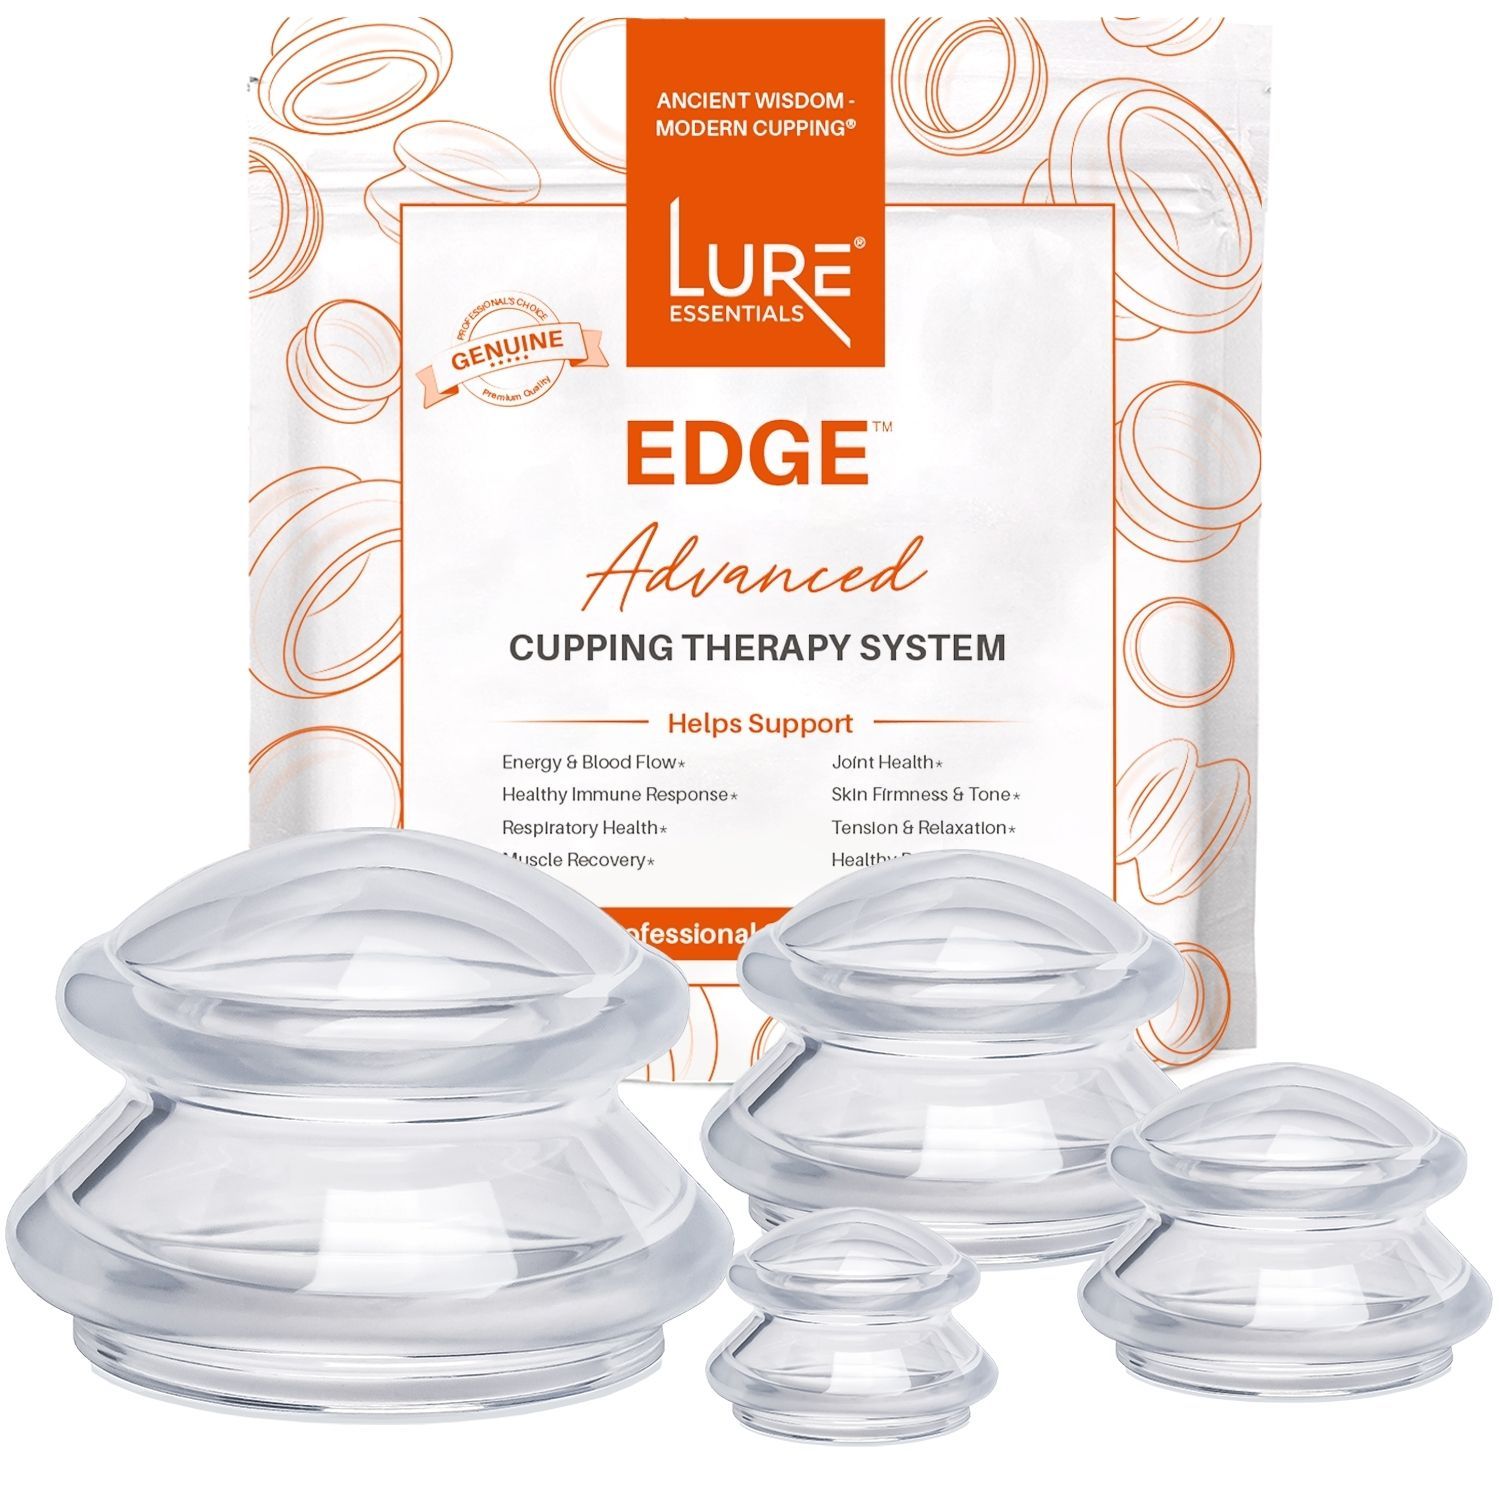 RuiKe Edge Cupping Set – Ultra Clear Blue Silicone Cupping Therapy Set For  Cellulite Reduction And Myofascial Release - Massage Therapists And Home  Use 